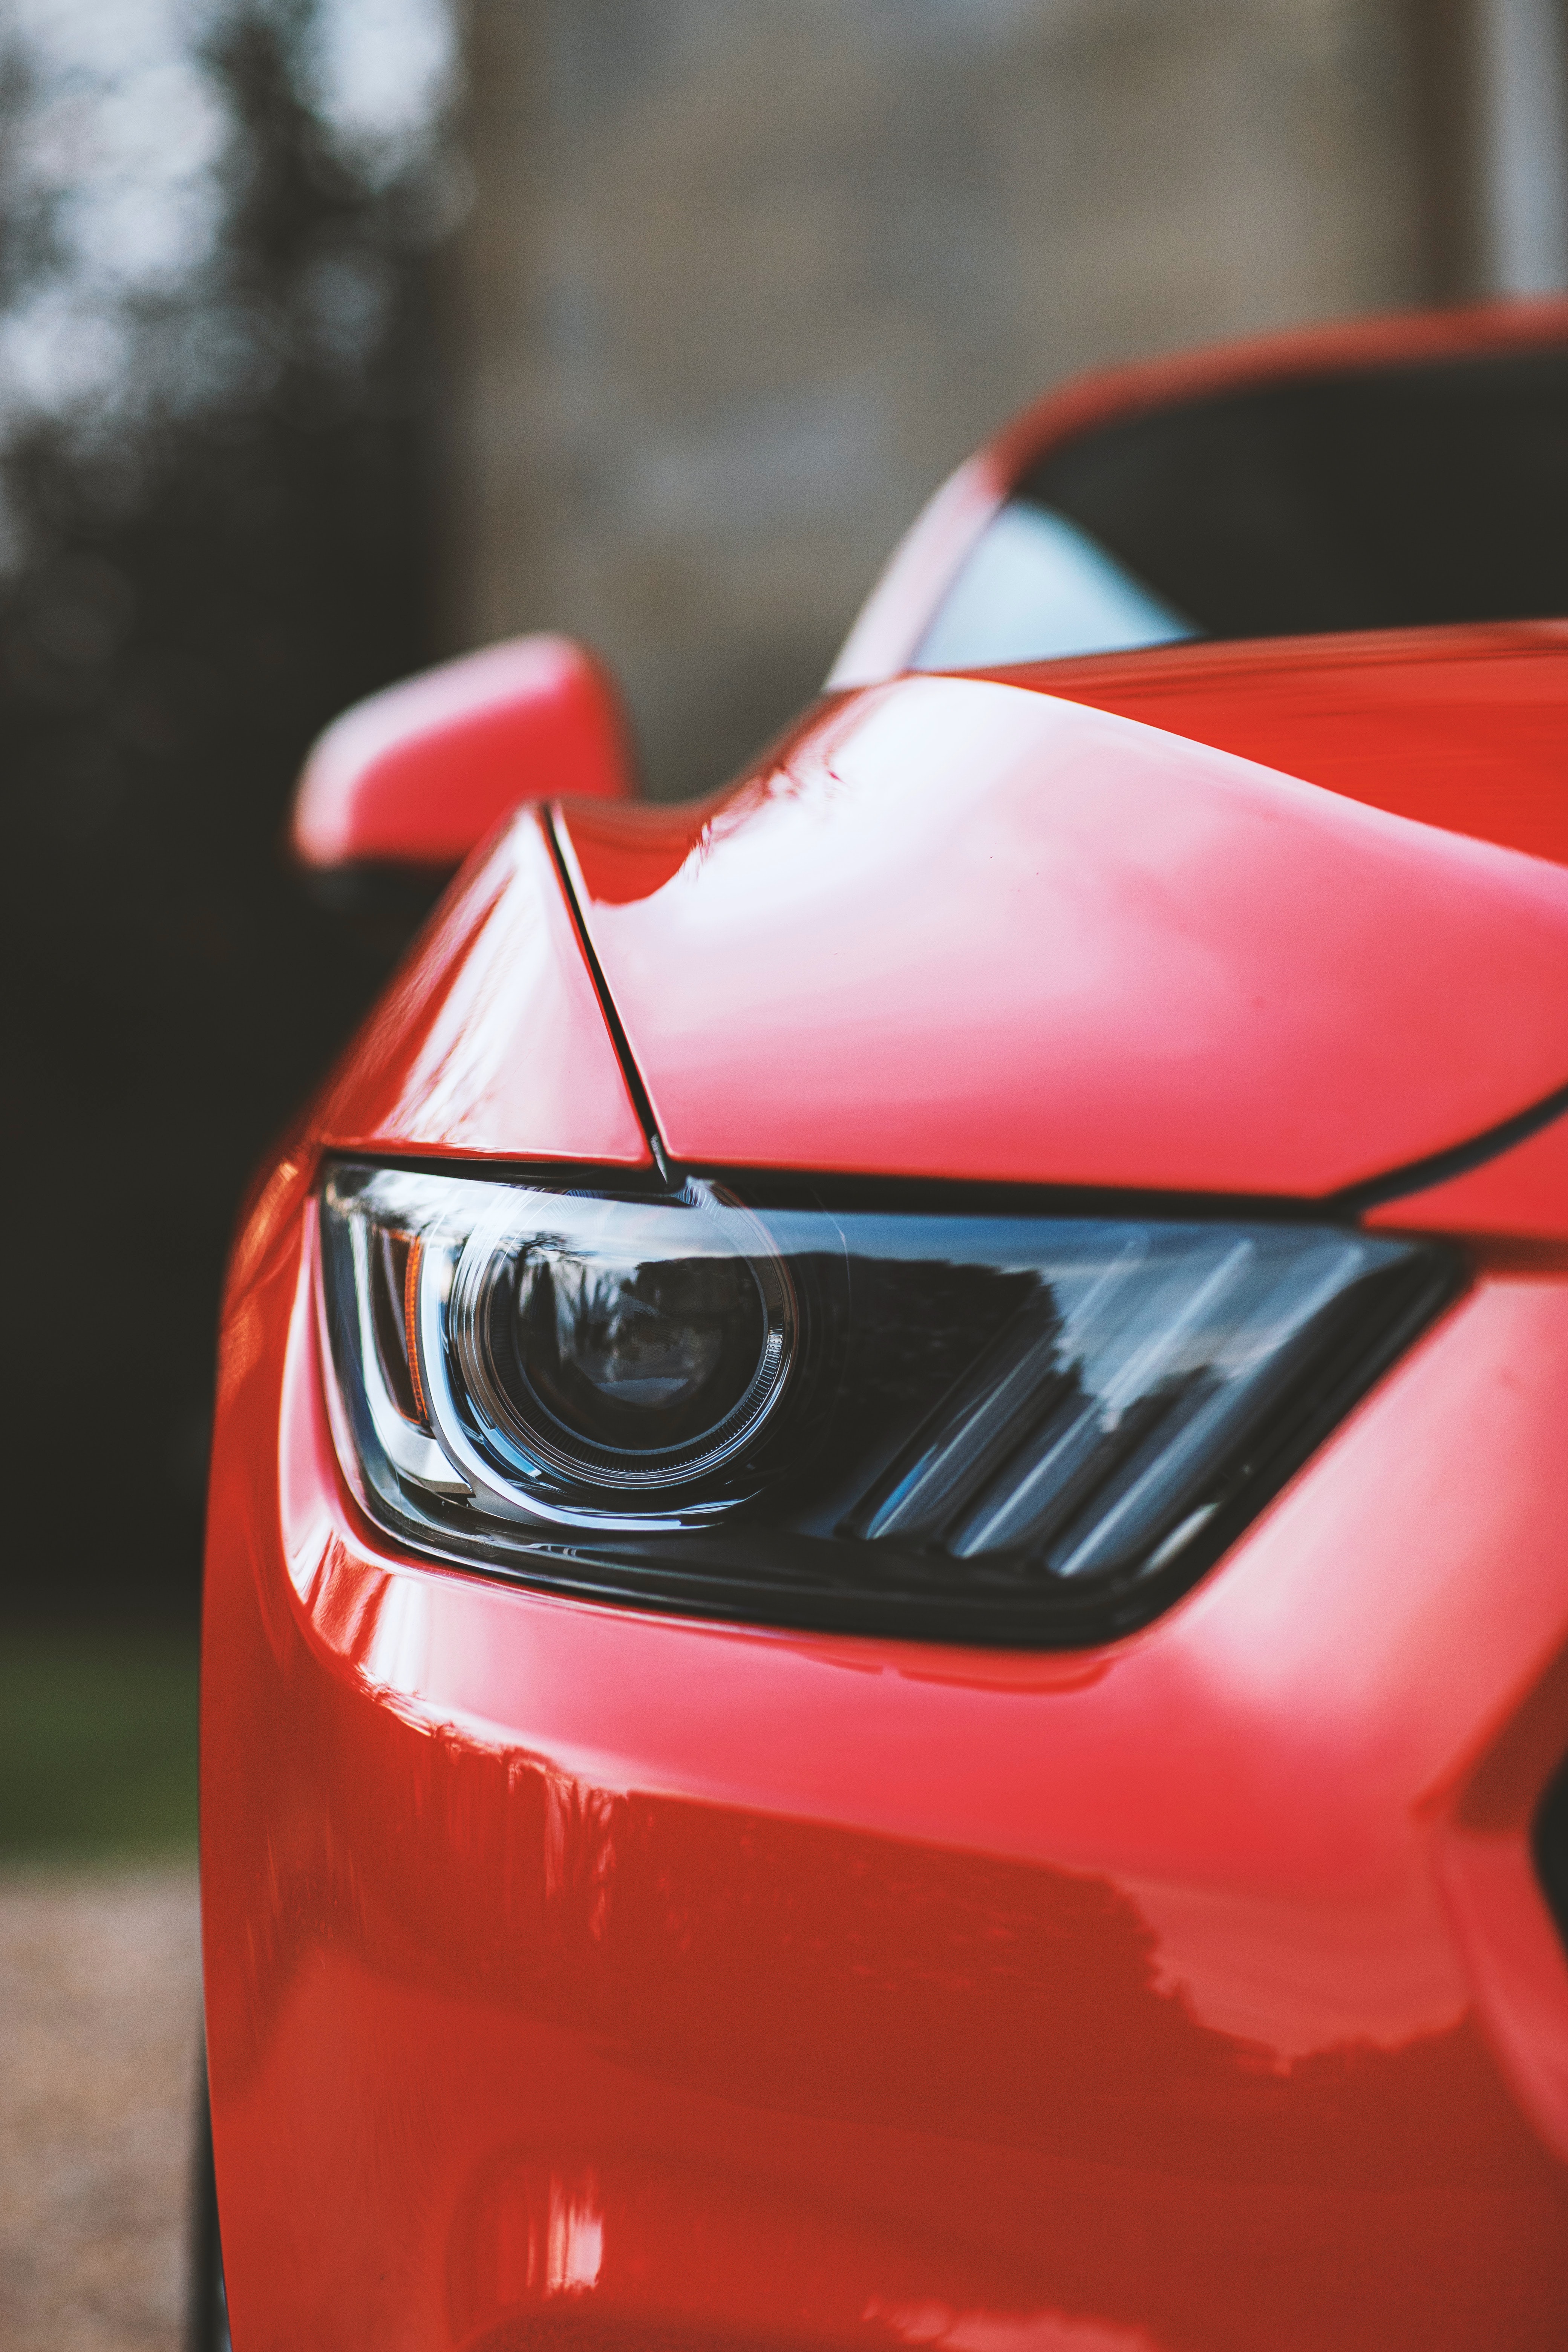 cars, red, car, front view, machine, headlight